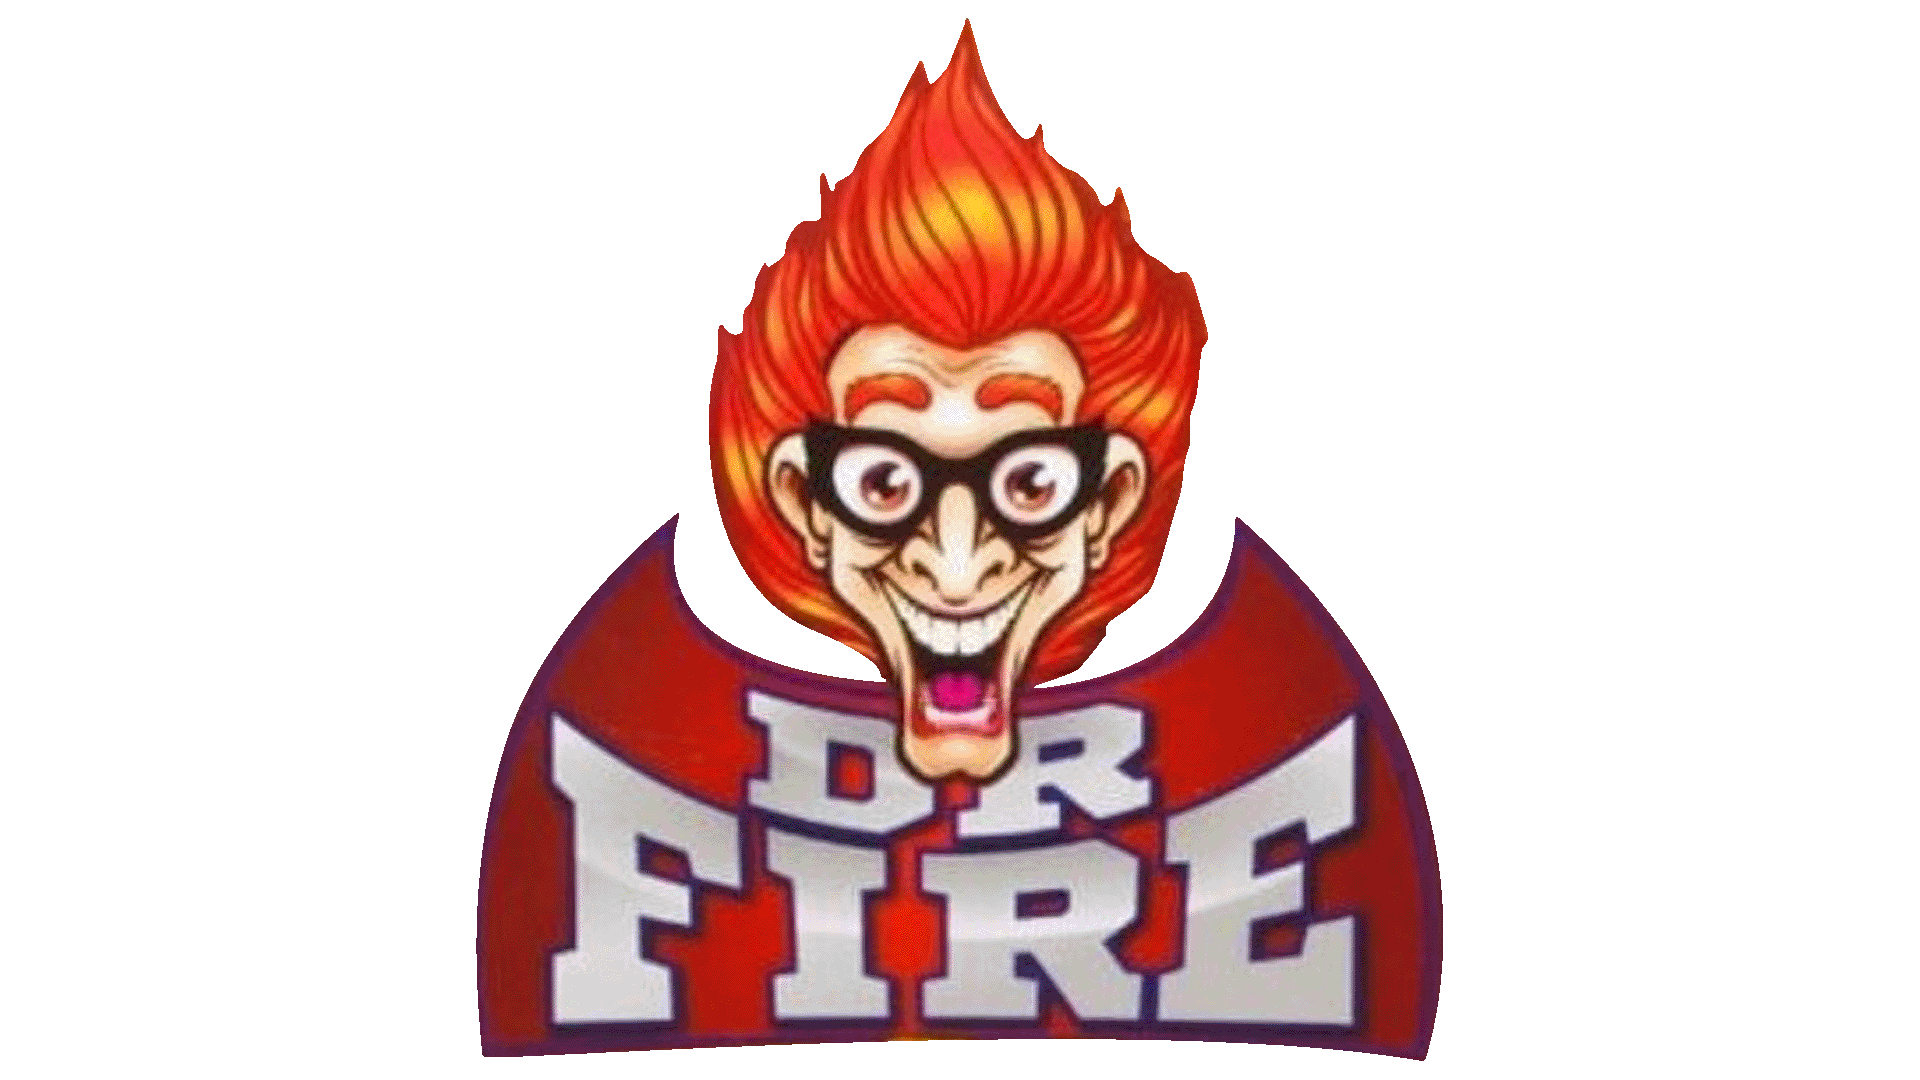 Marque: DR. FIRE